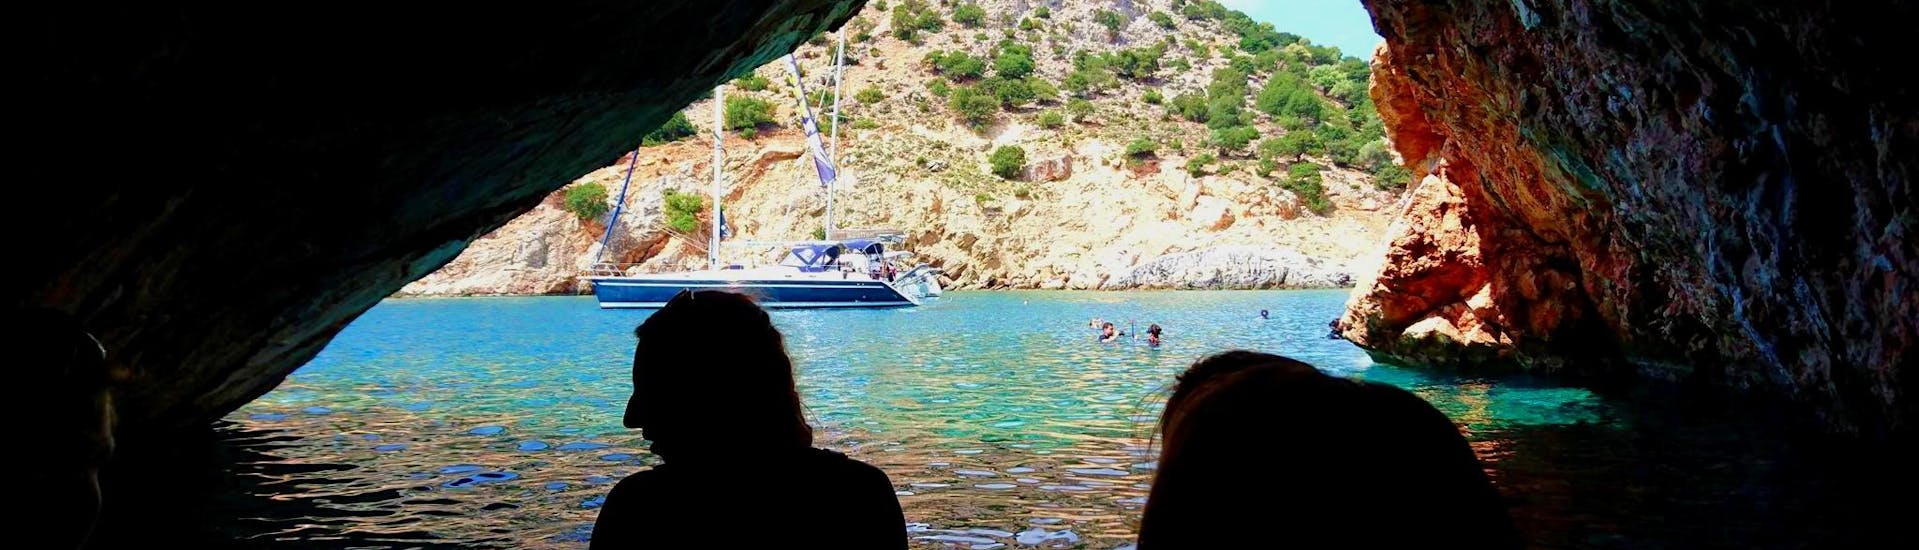 During the Full-Day Sailing Cruise to Rina Cave and Koufonissi with Naxos Catamaran, the participants are exploring the inside of the cave.